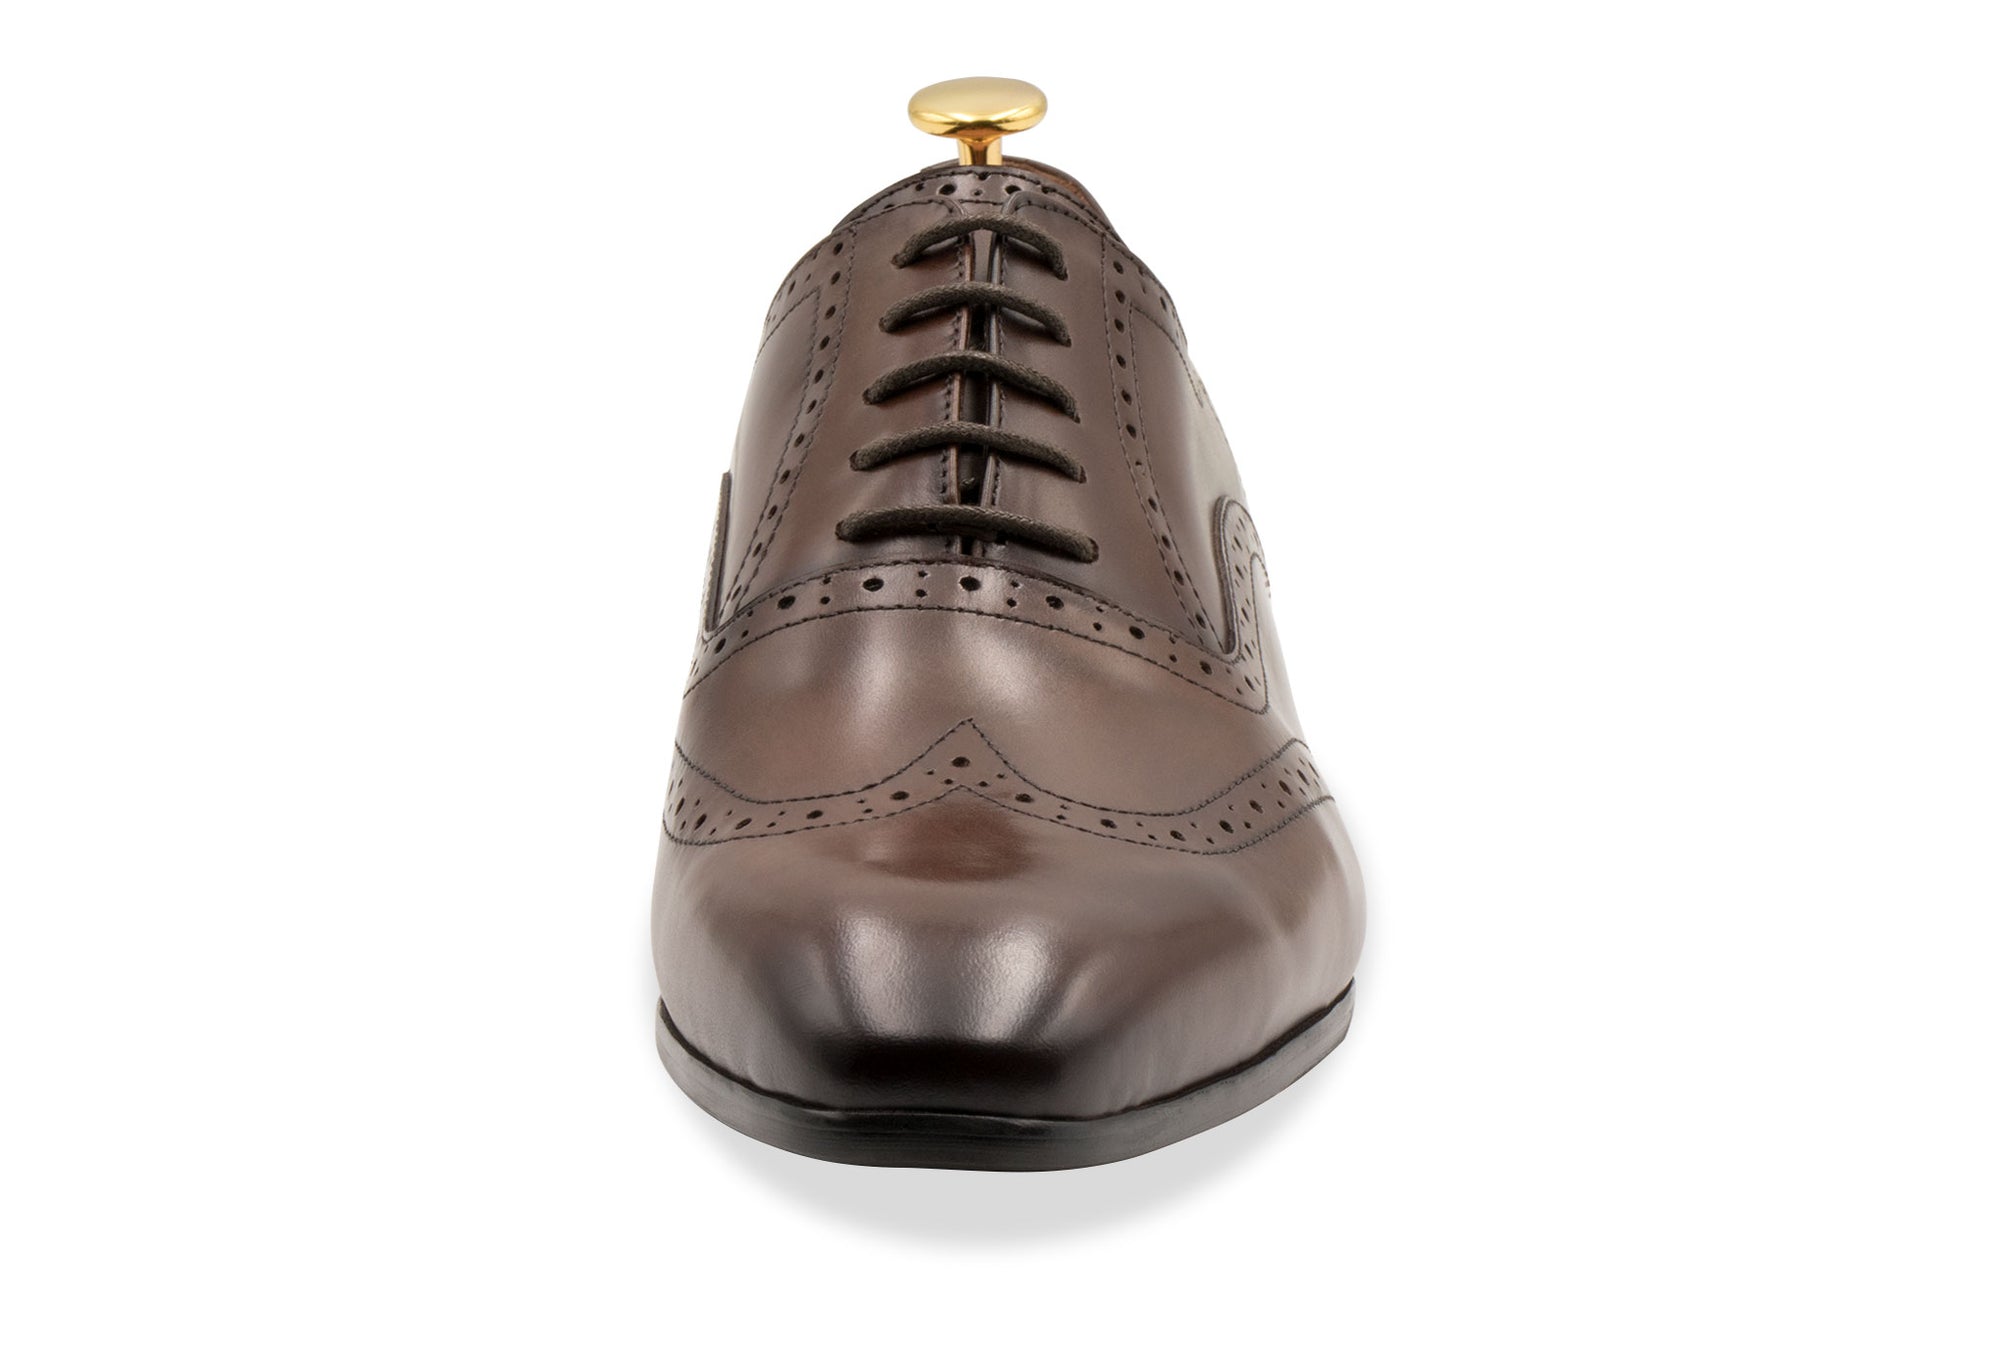 Rosario Wingtip Pecan Oxford Leather Shoes